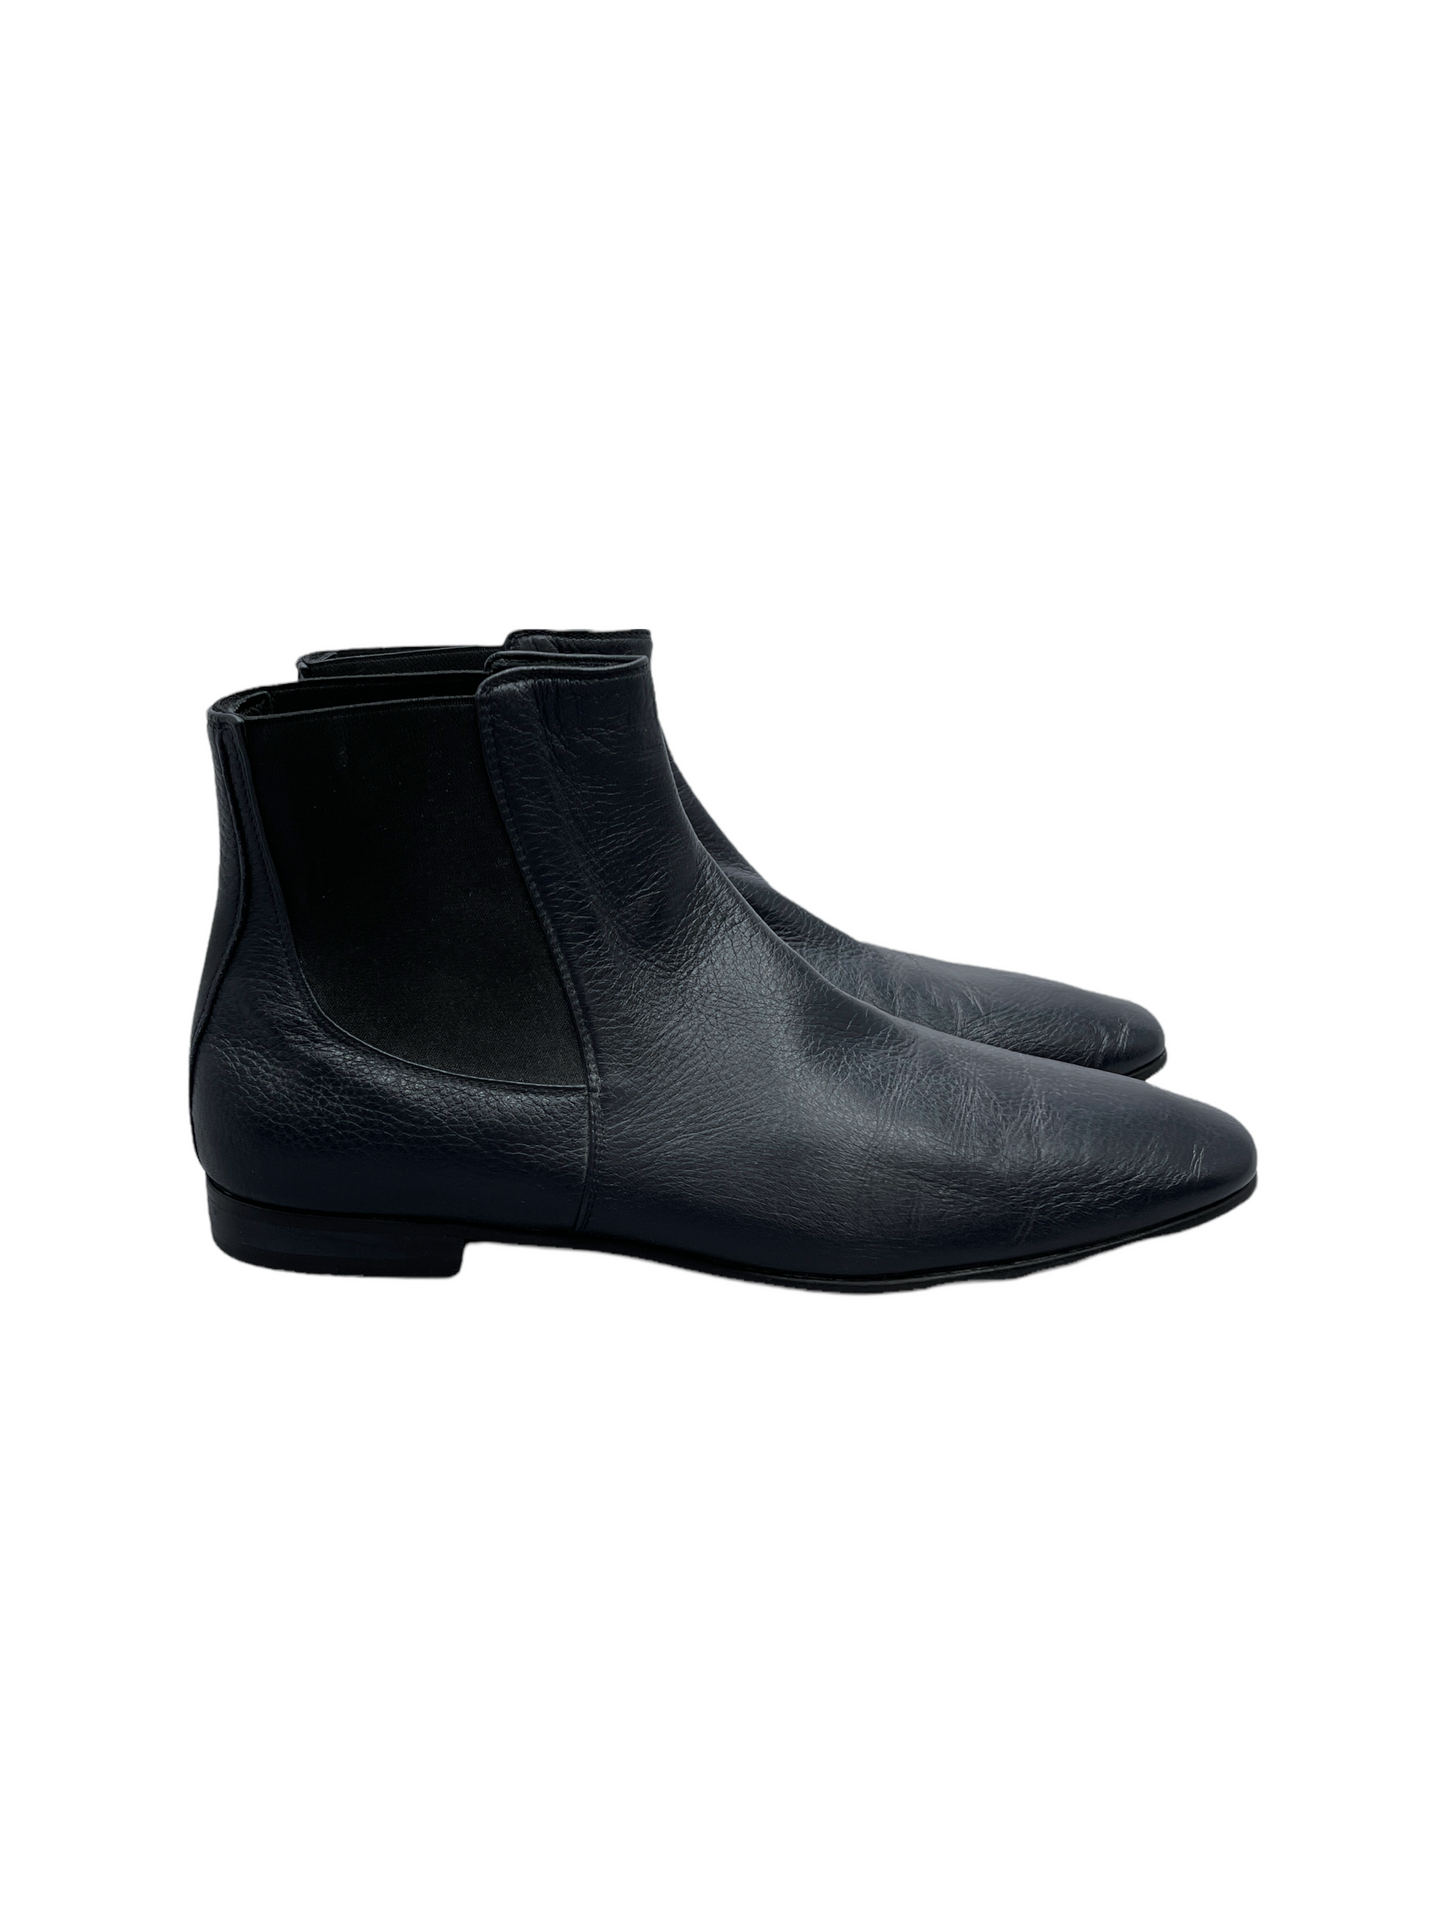 Dolce & Gabbana Navy Blue Deerskin Leather Chelsea Boots 11 US - Genuine Design Luxury Consignment for Men. New & Pre-Owned Clothing, Shoes, & Accessories. Calgary, Canada